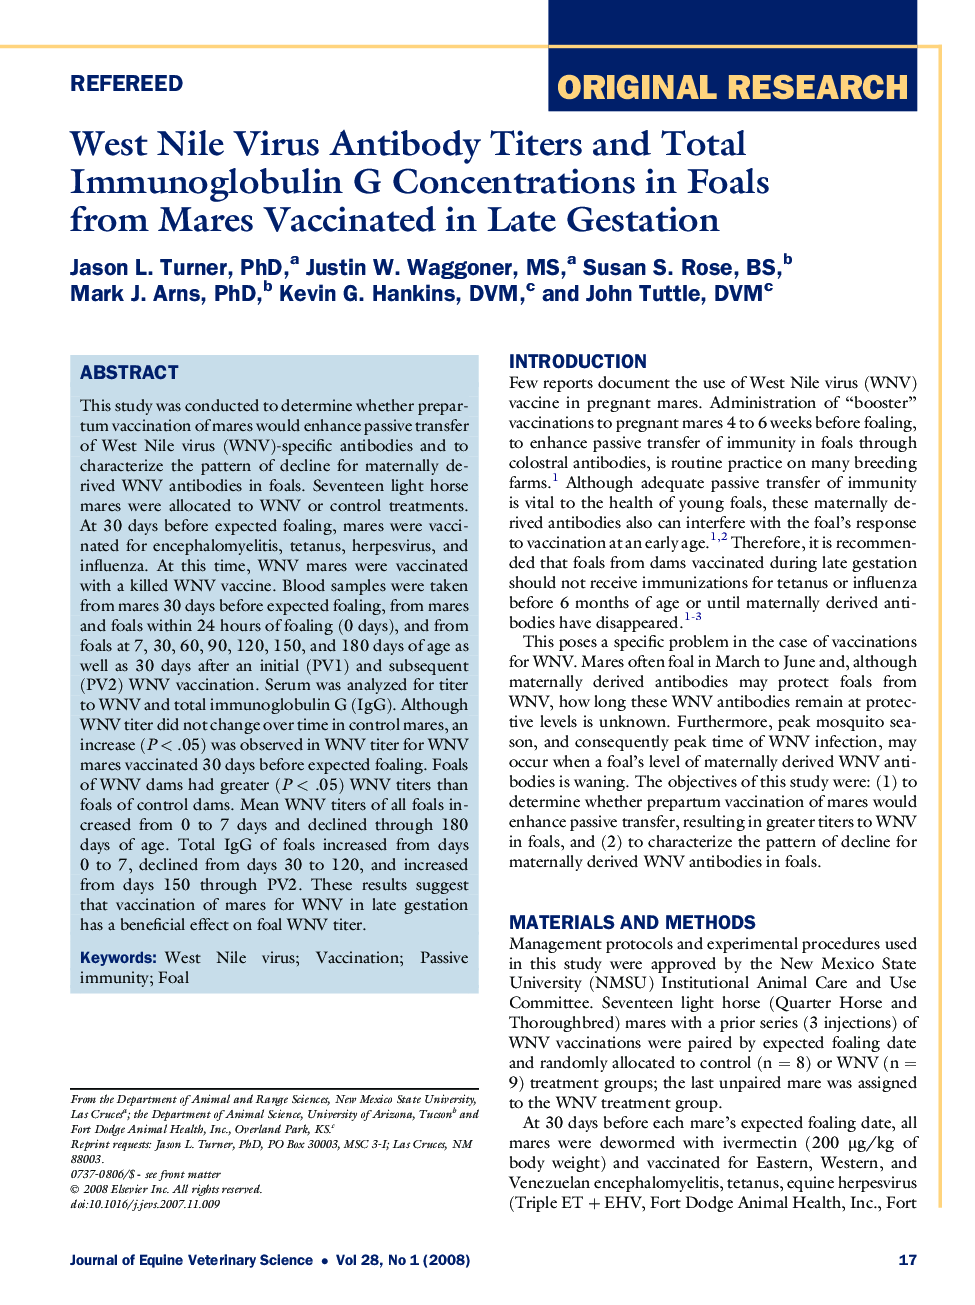 West Nile Virus Antibody Titers and Total Immunoglobulin G Concentrations in Foals from Mares Vaccinated in Late Gestation 